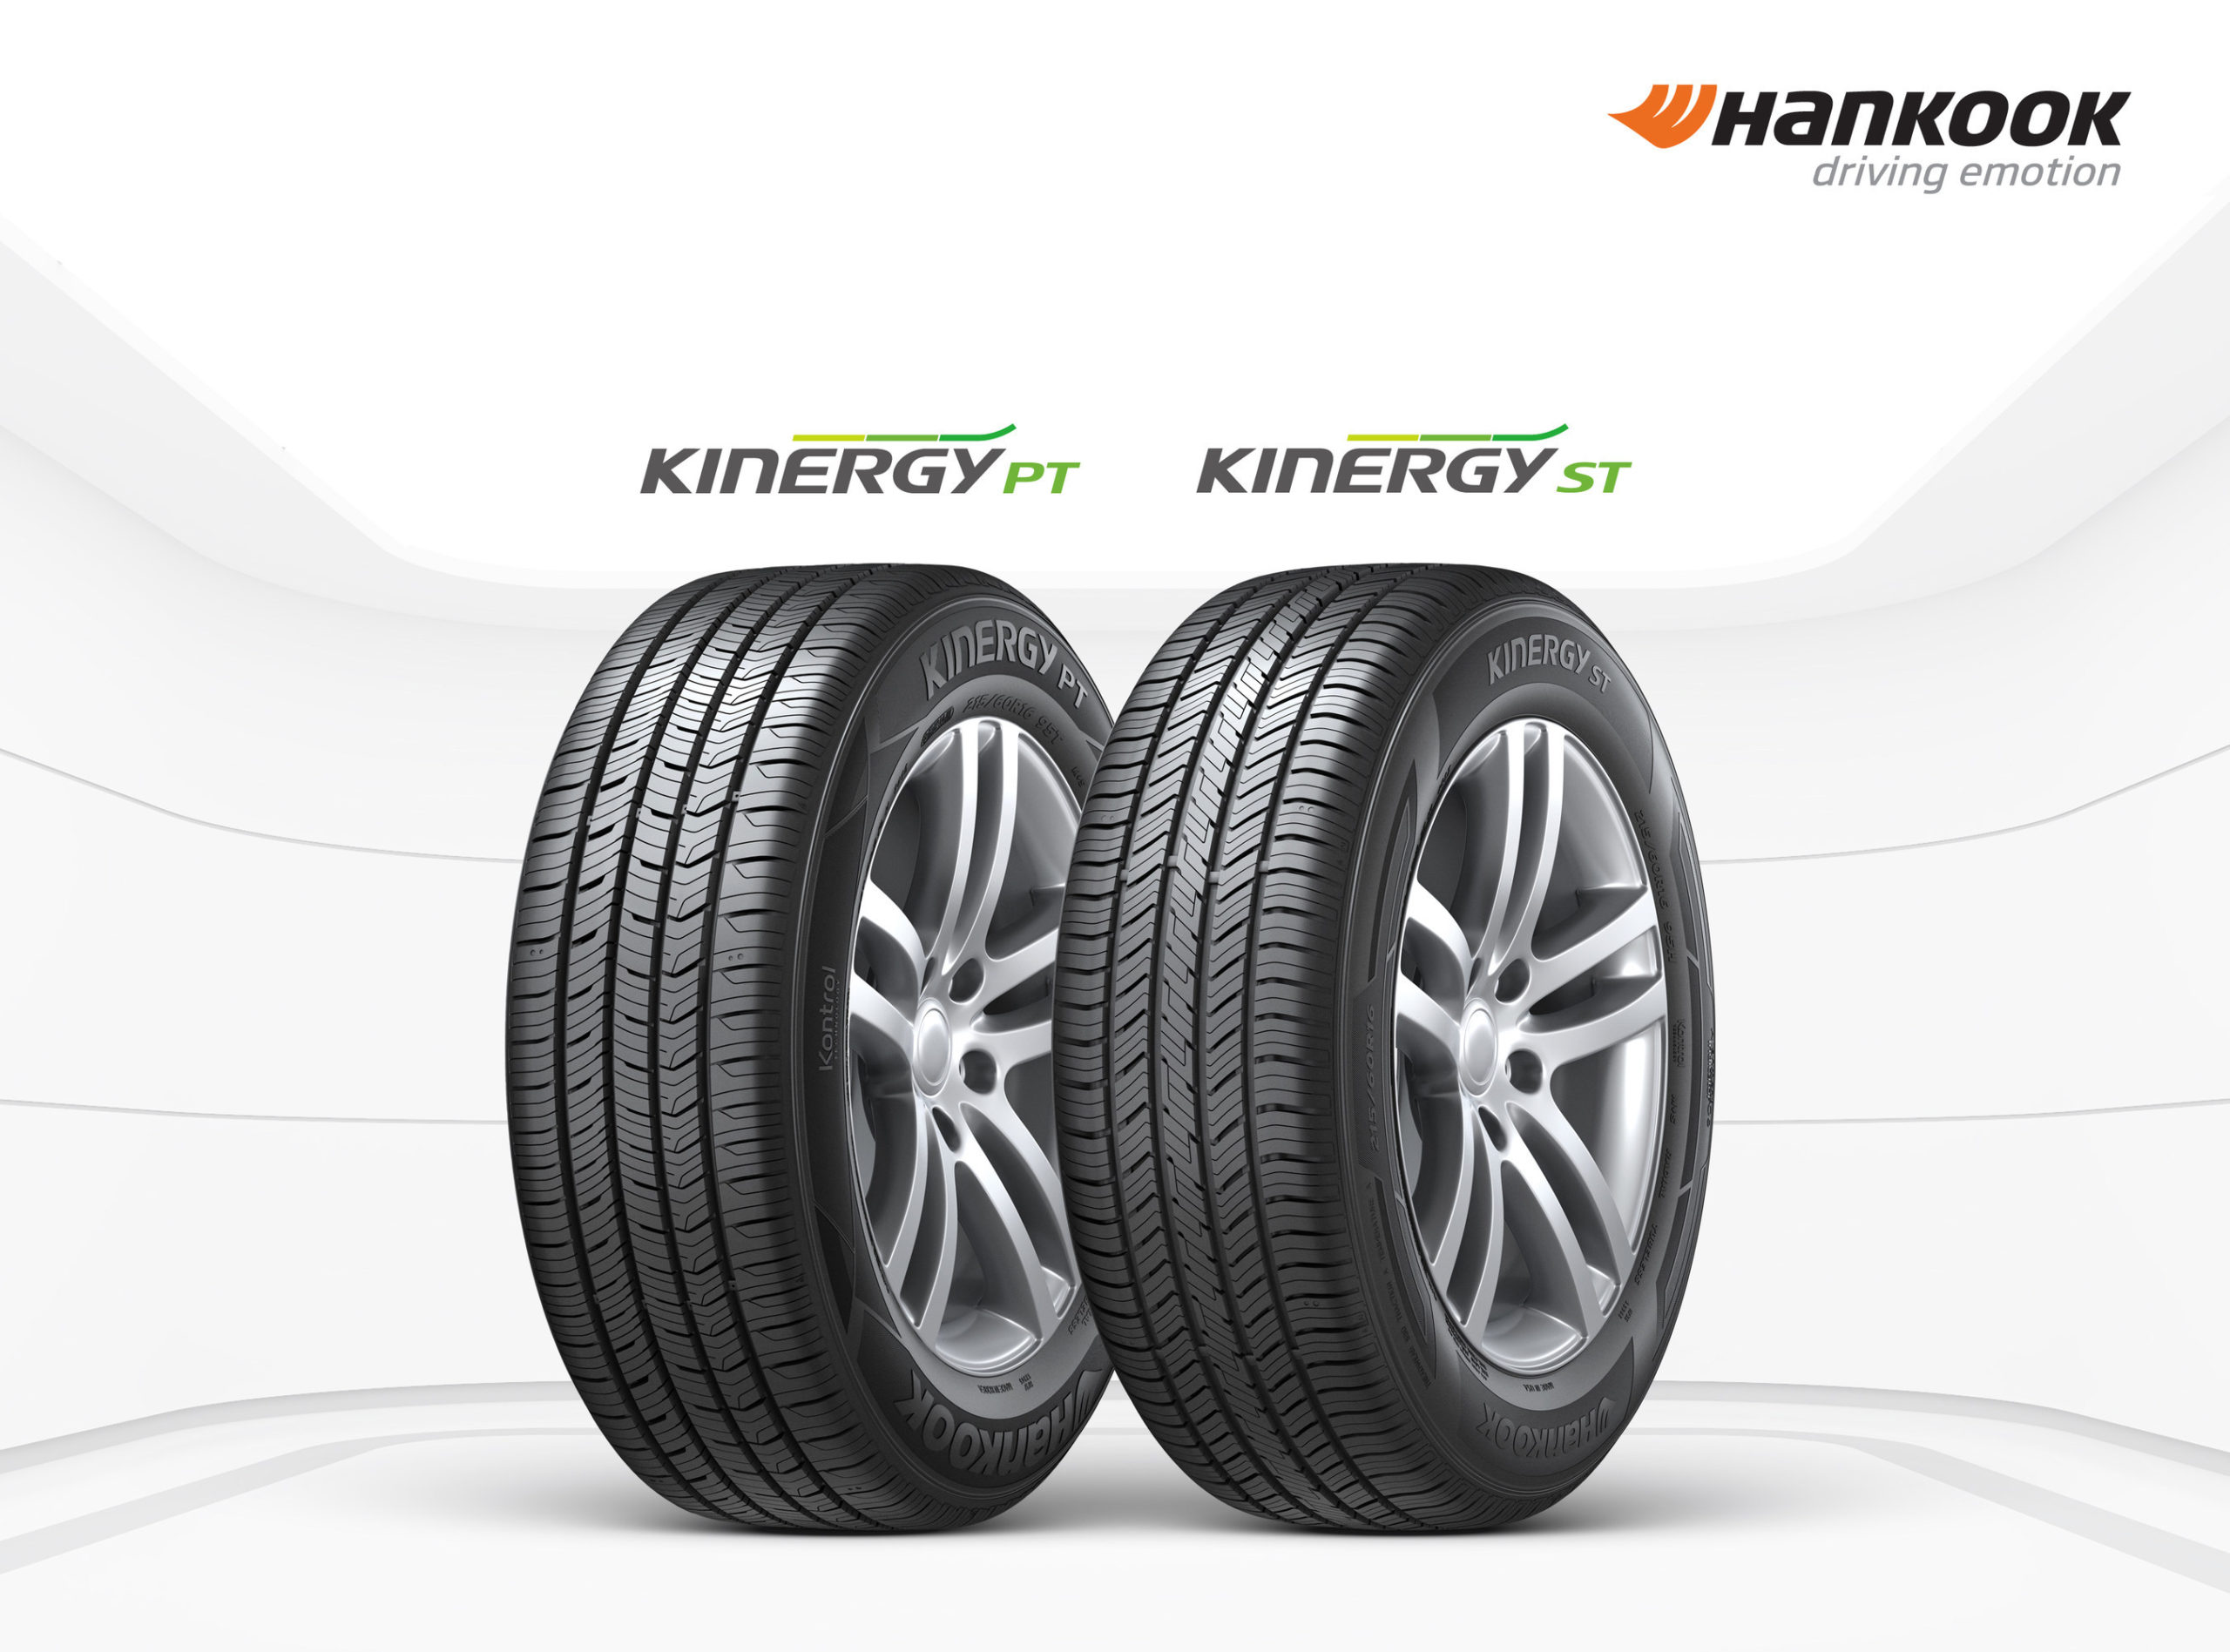 Hankook Tire Announces Expanded Kinergy Line For U.S. Production